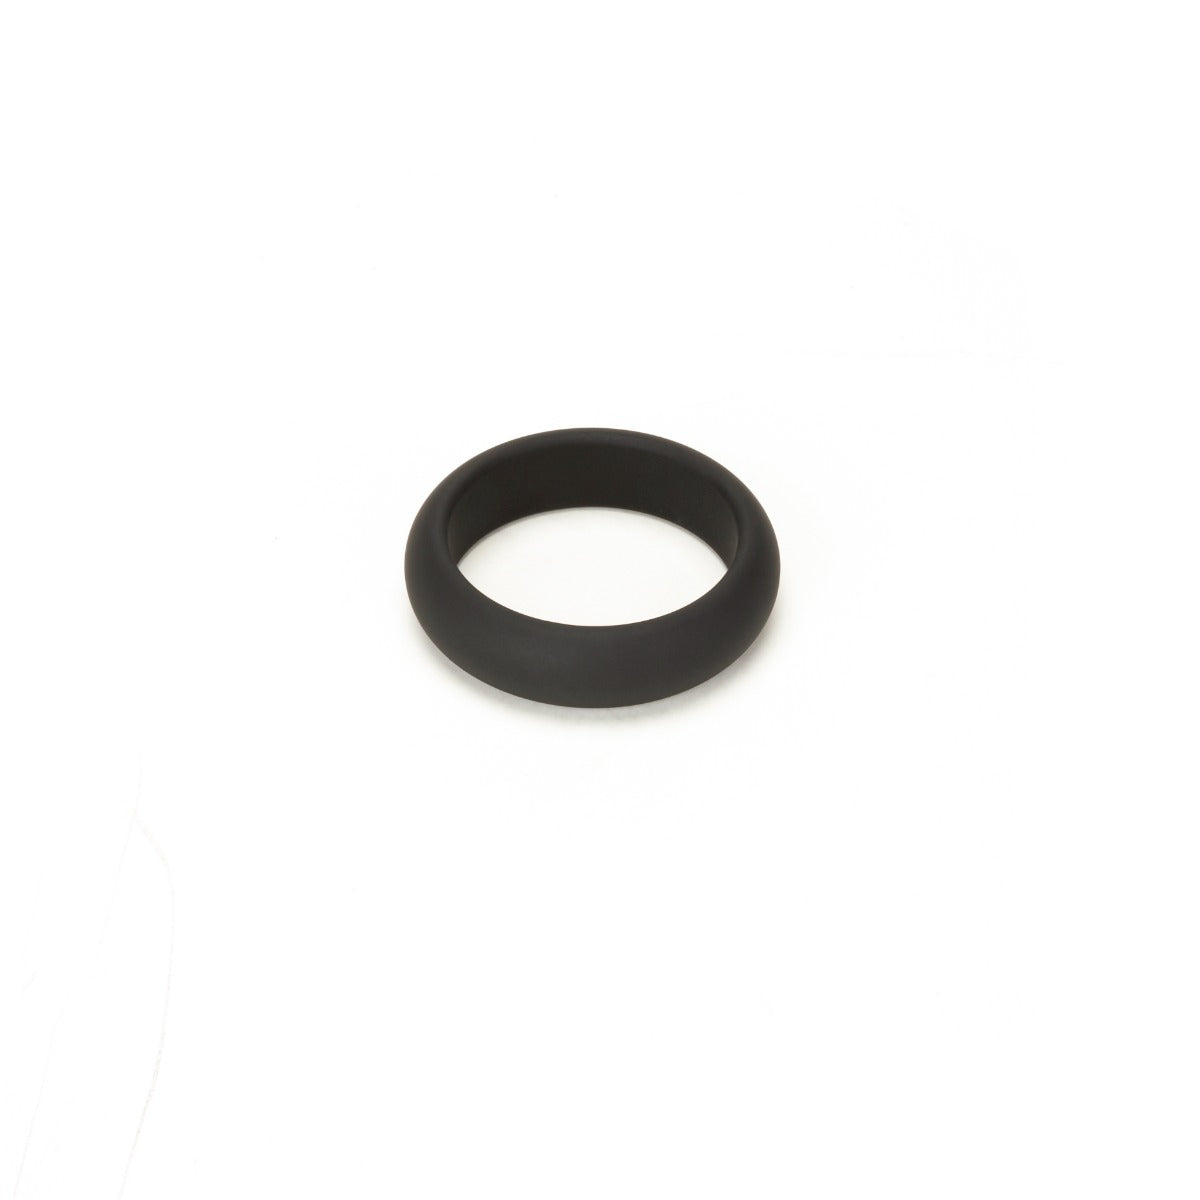 a black silicone ring on a white background